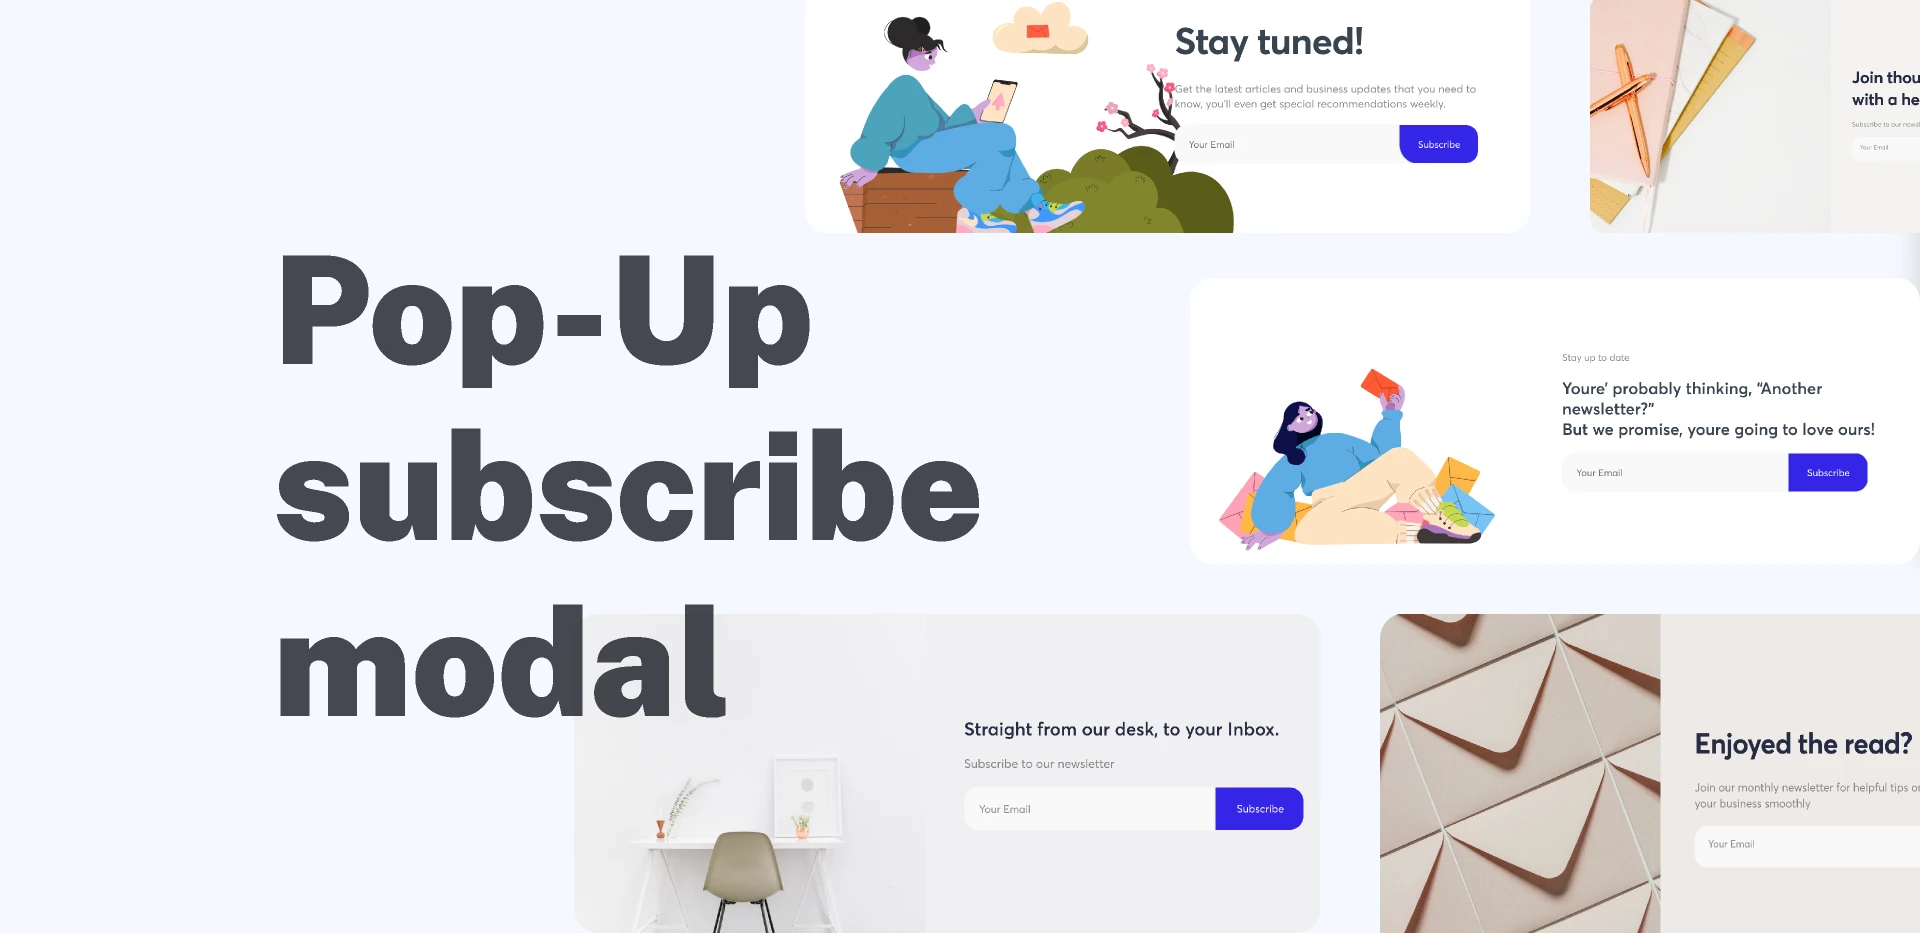 Pop-up Subscribe modal for Figma and Adobe XD